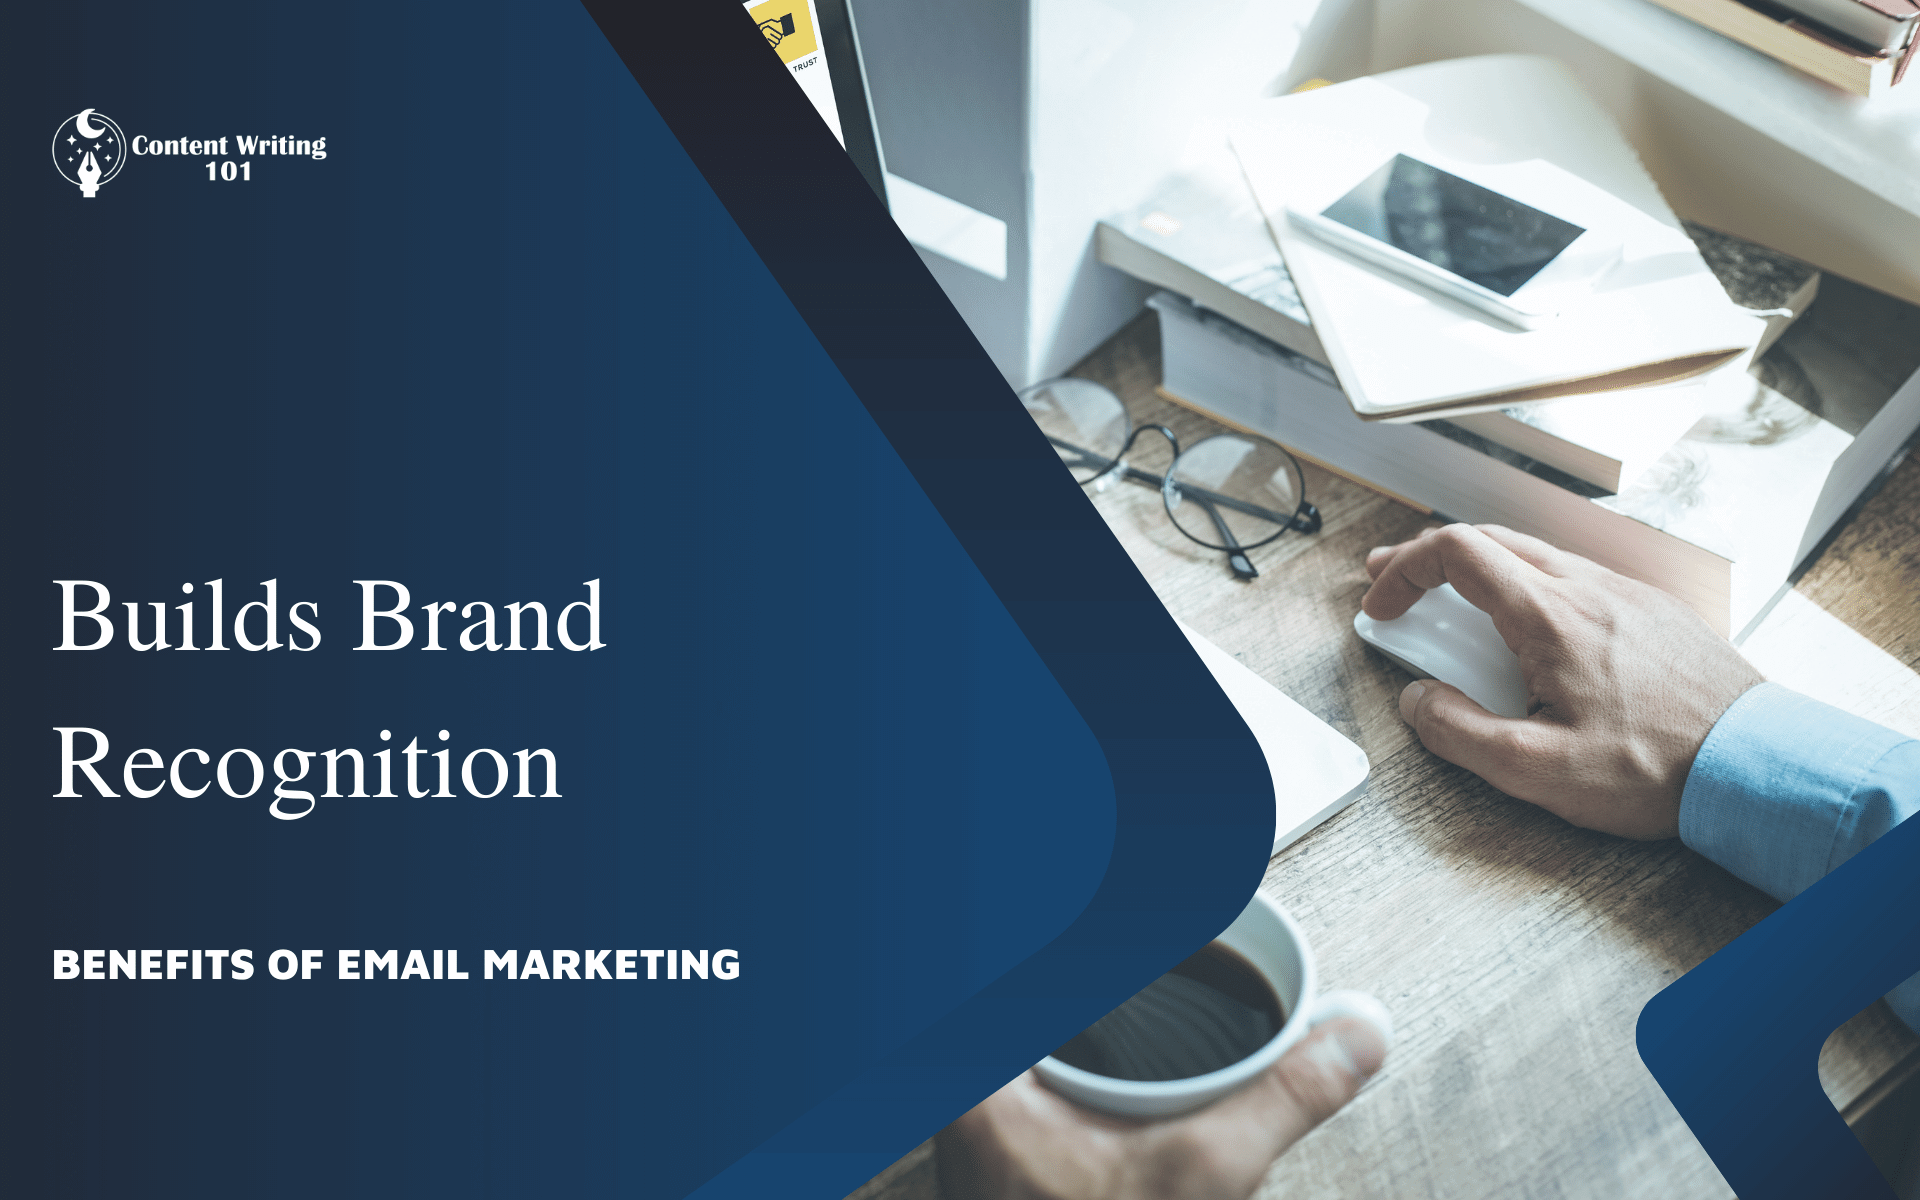 7. Builds Brand Recognition 